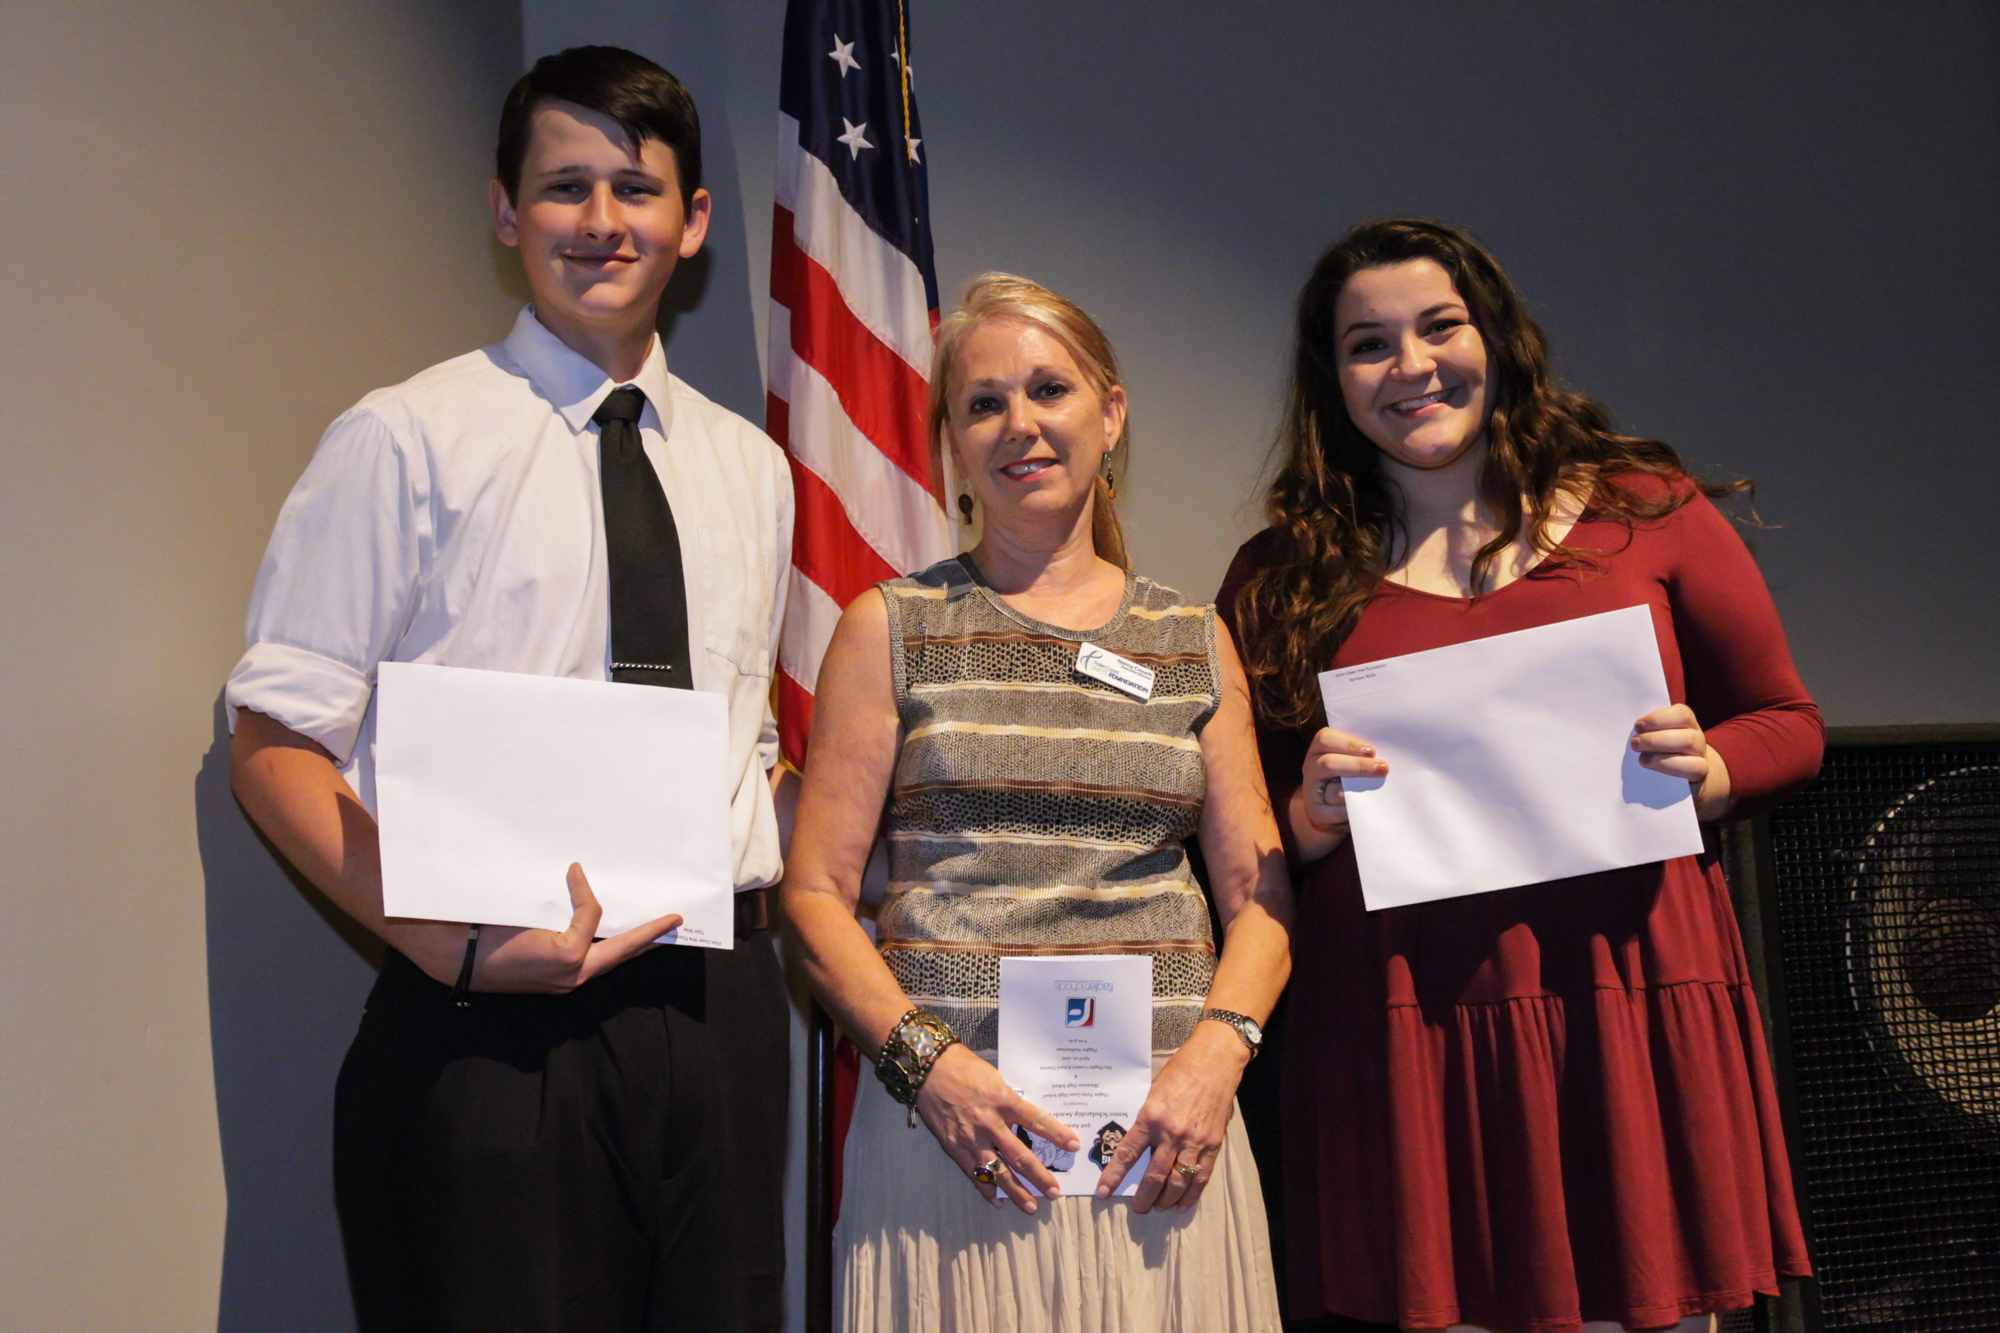 Scholarship winners Tyler Wise and Kathleen Wells with PCAF Executive Director Nancy Crouch in center. Photo courtesy of Palm Coast Arts Foundation